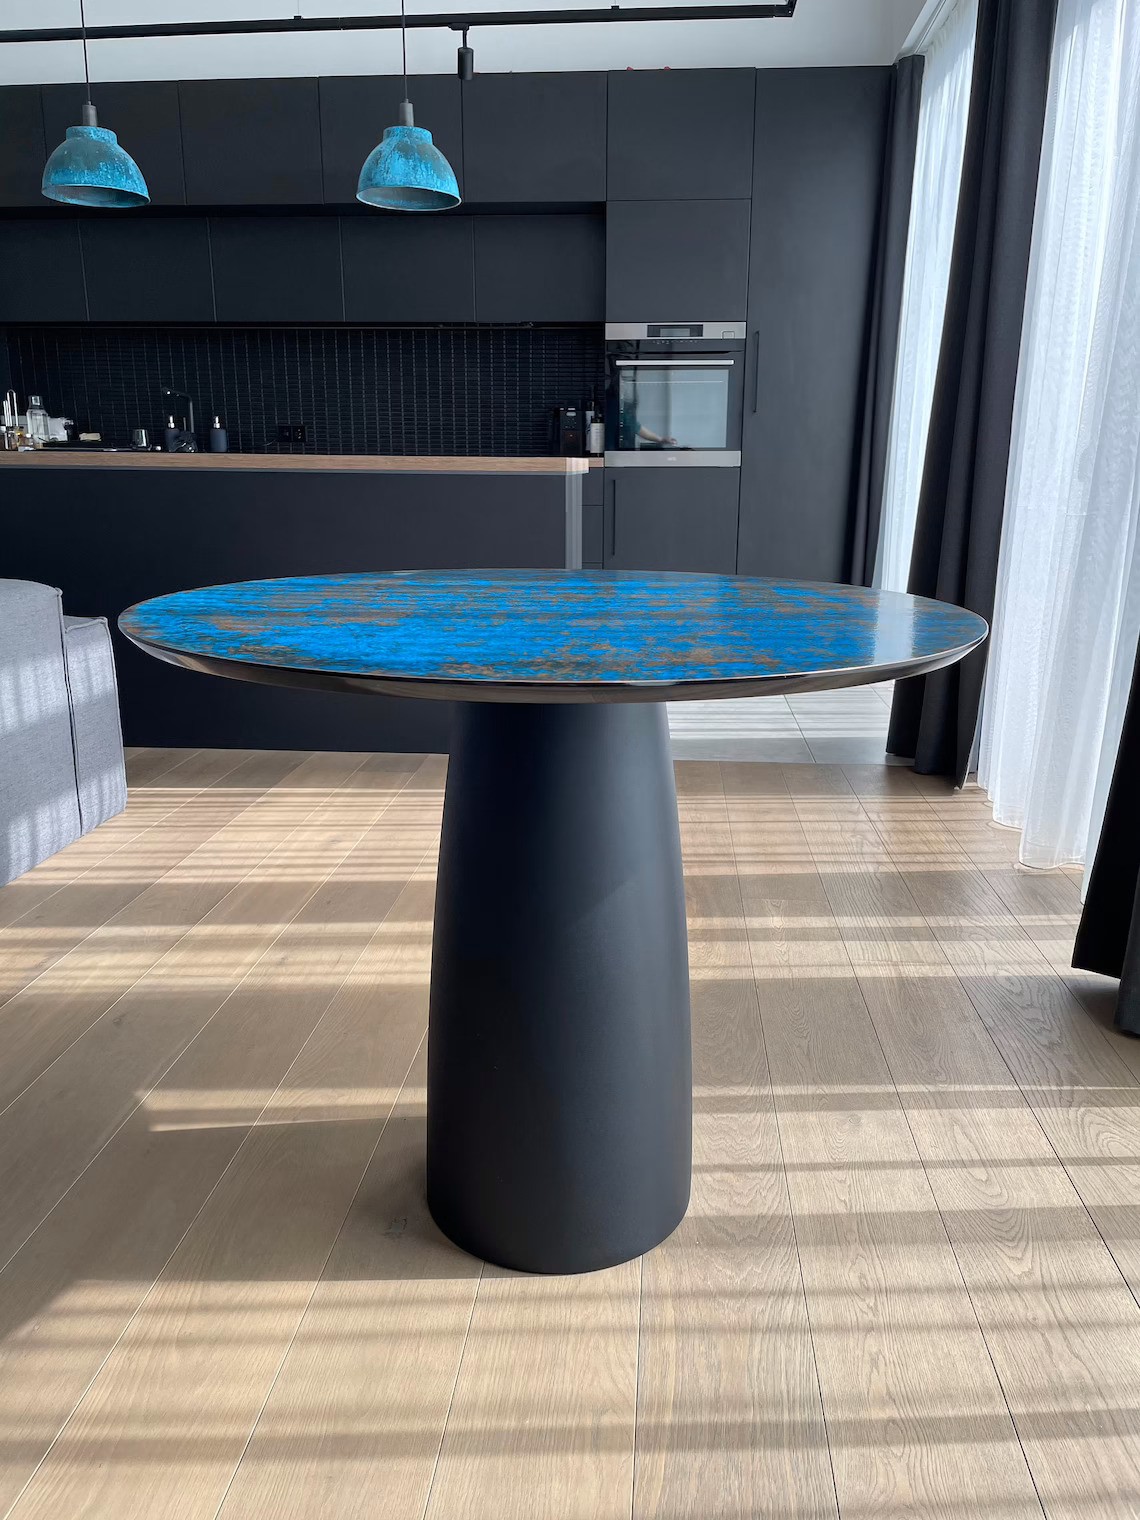 A glass table base that’s simple and streamlined